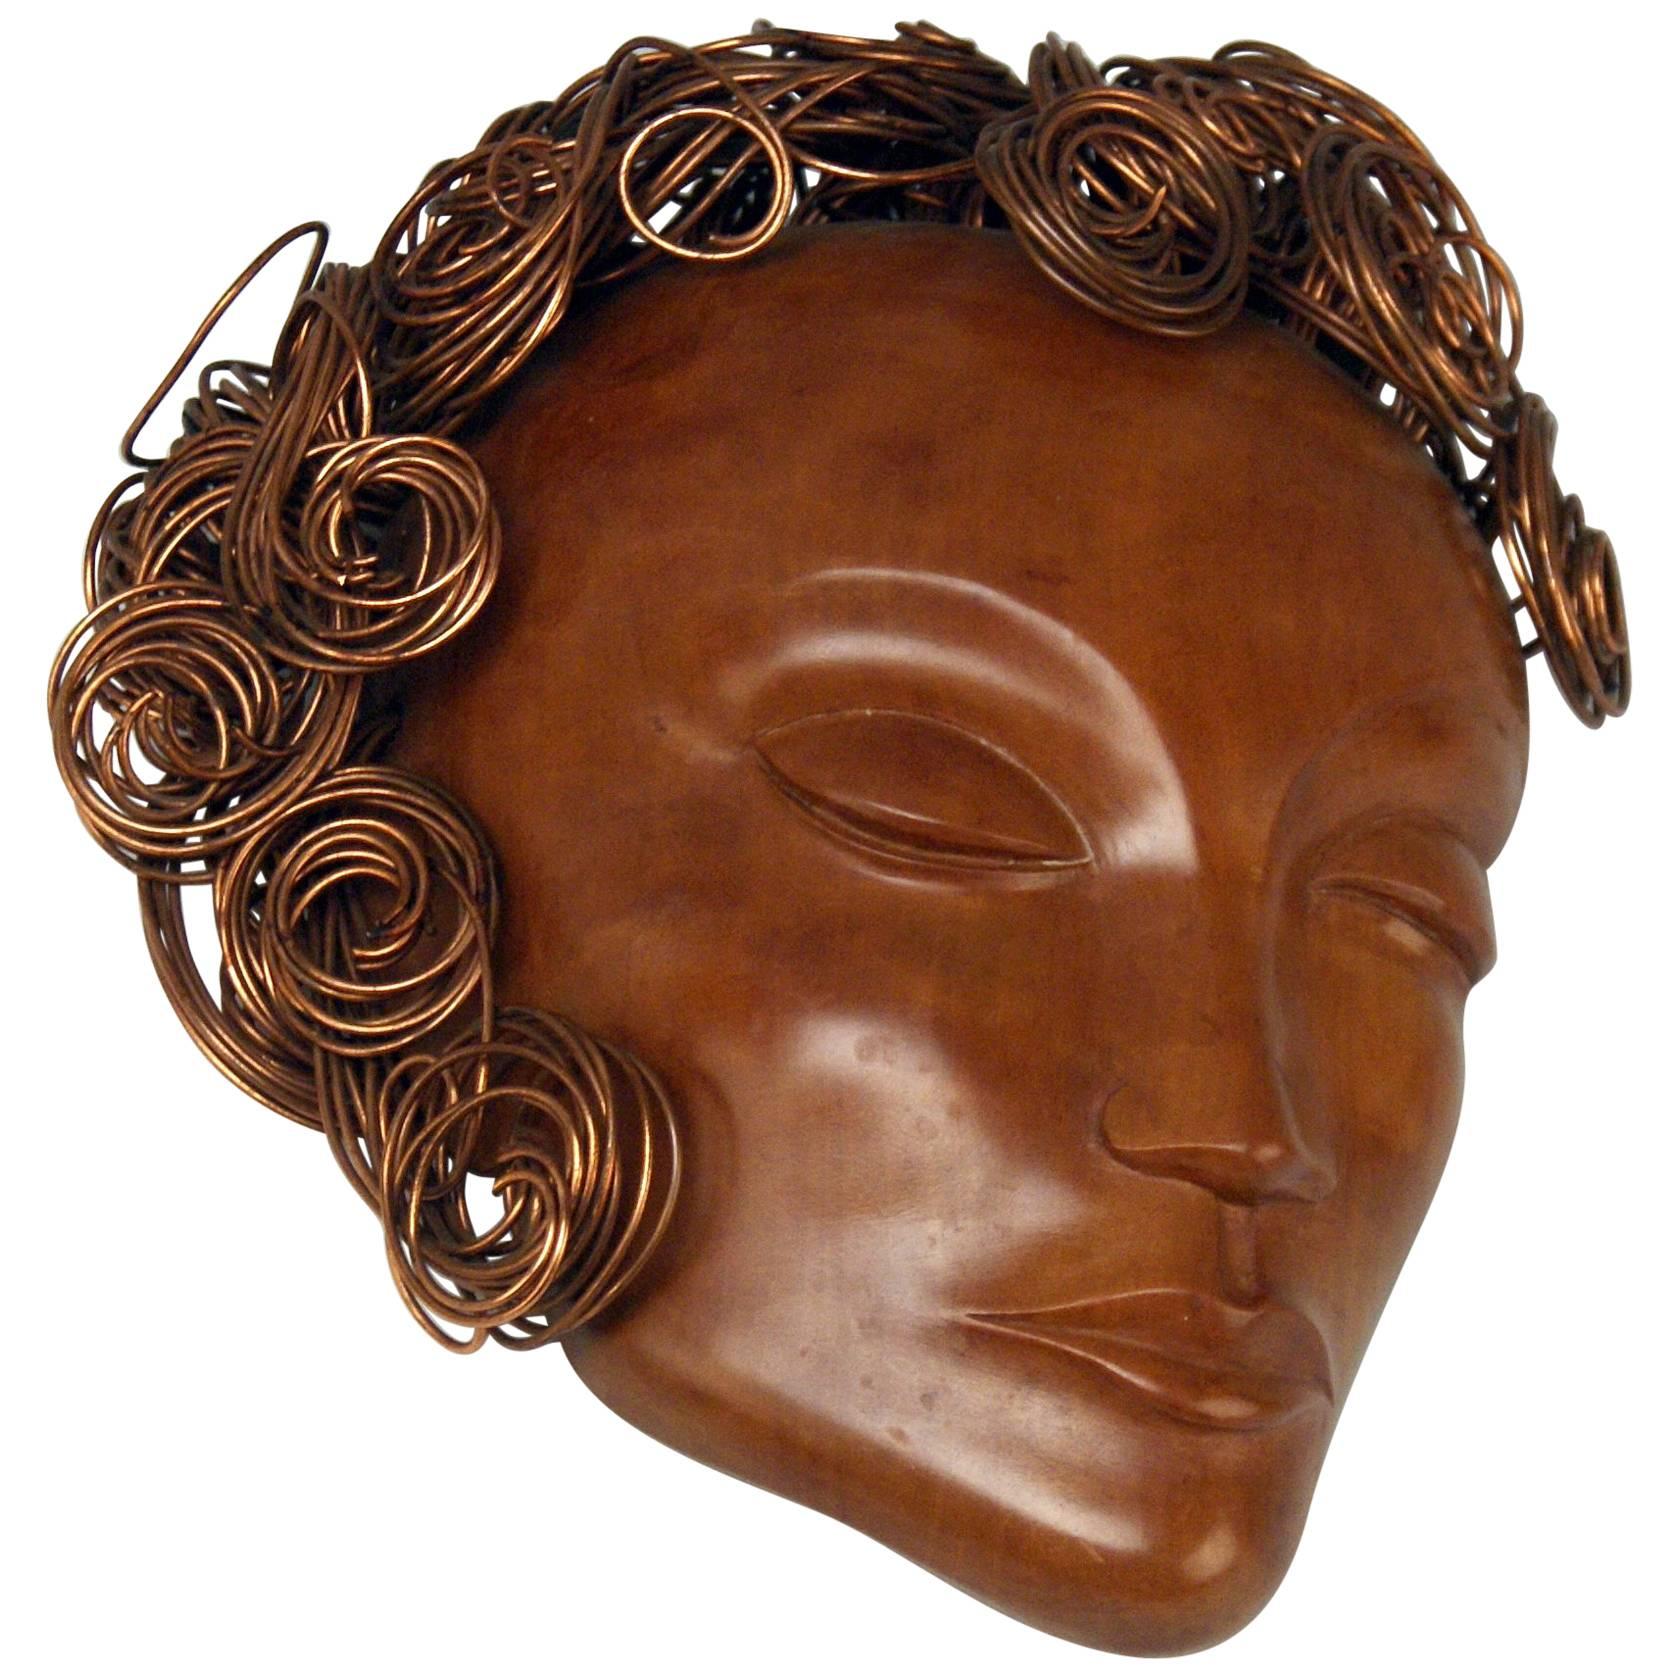 Art Deco Wooden Head Lady Curled Copper Hair by Hagenauer Vienna Made 1935-1940